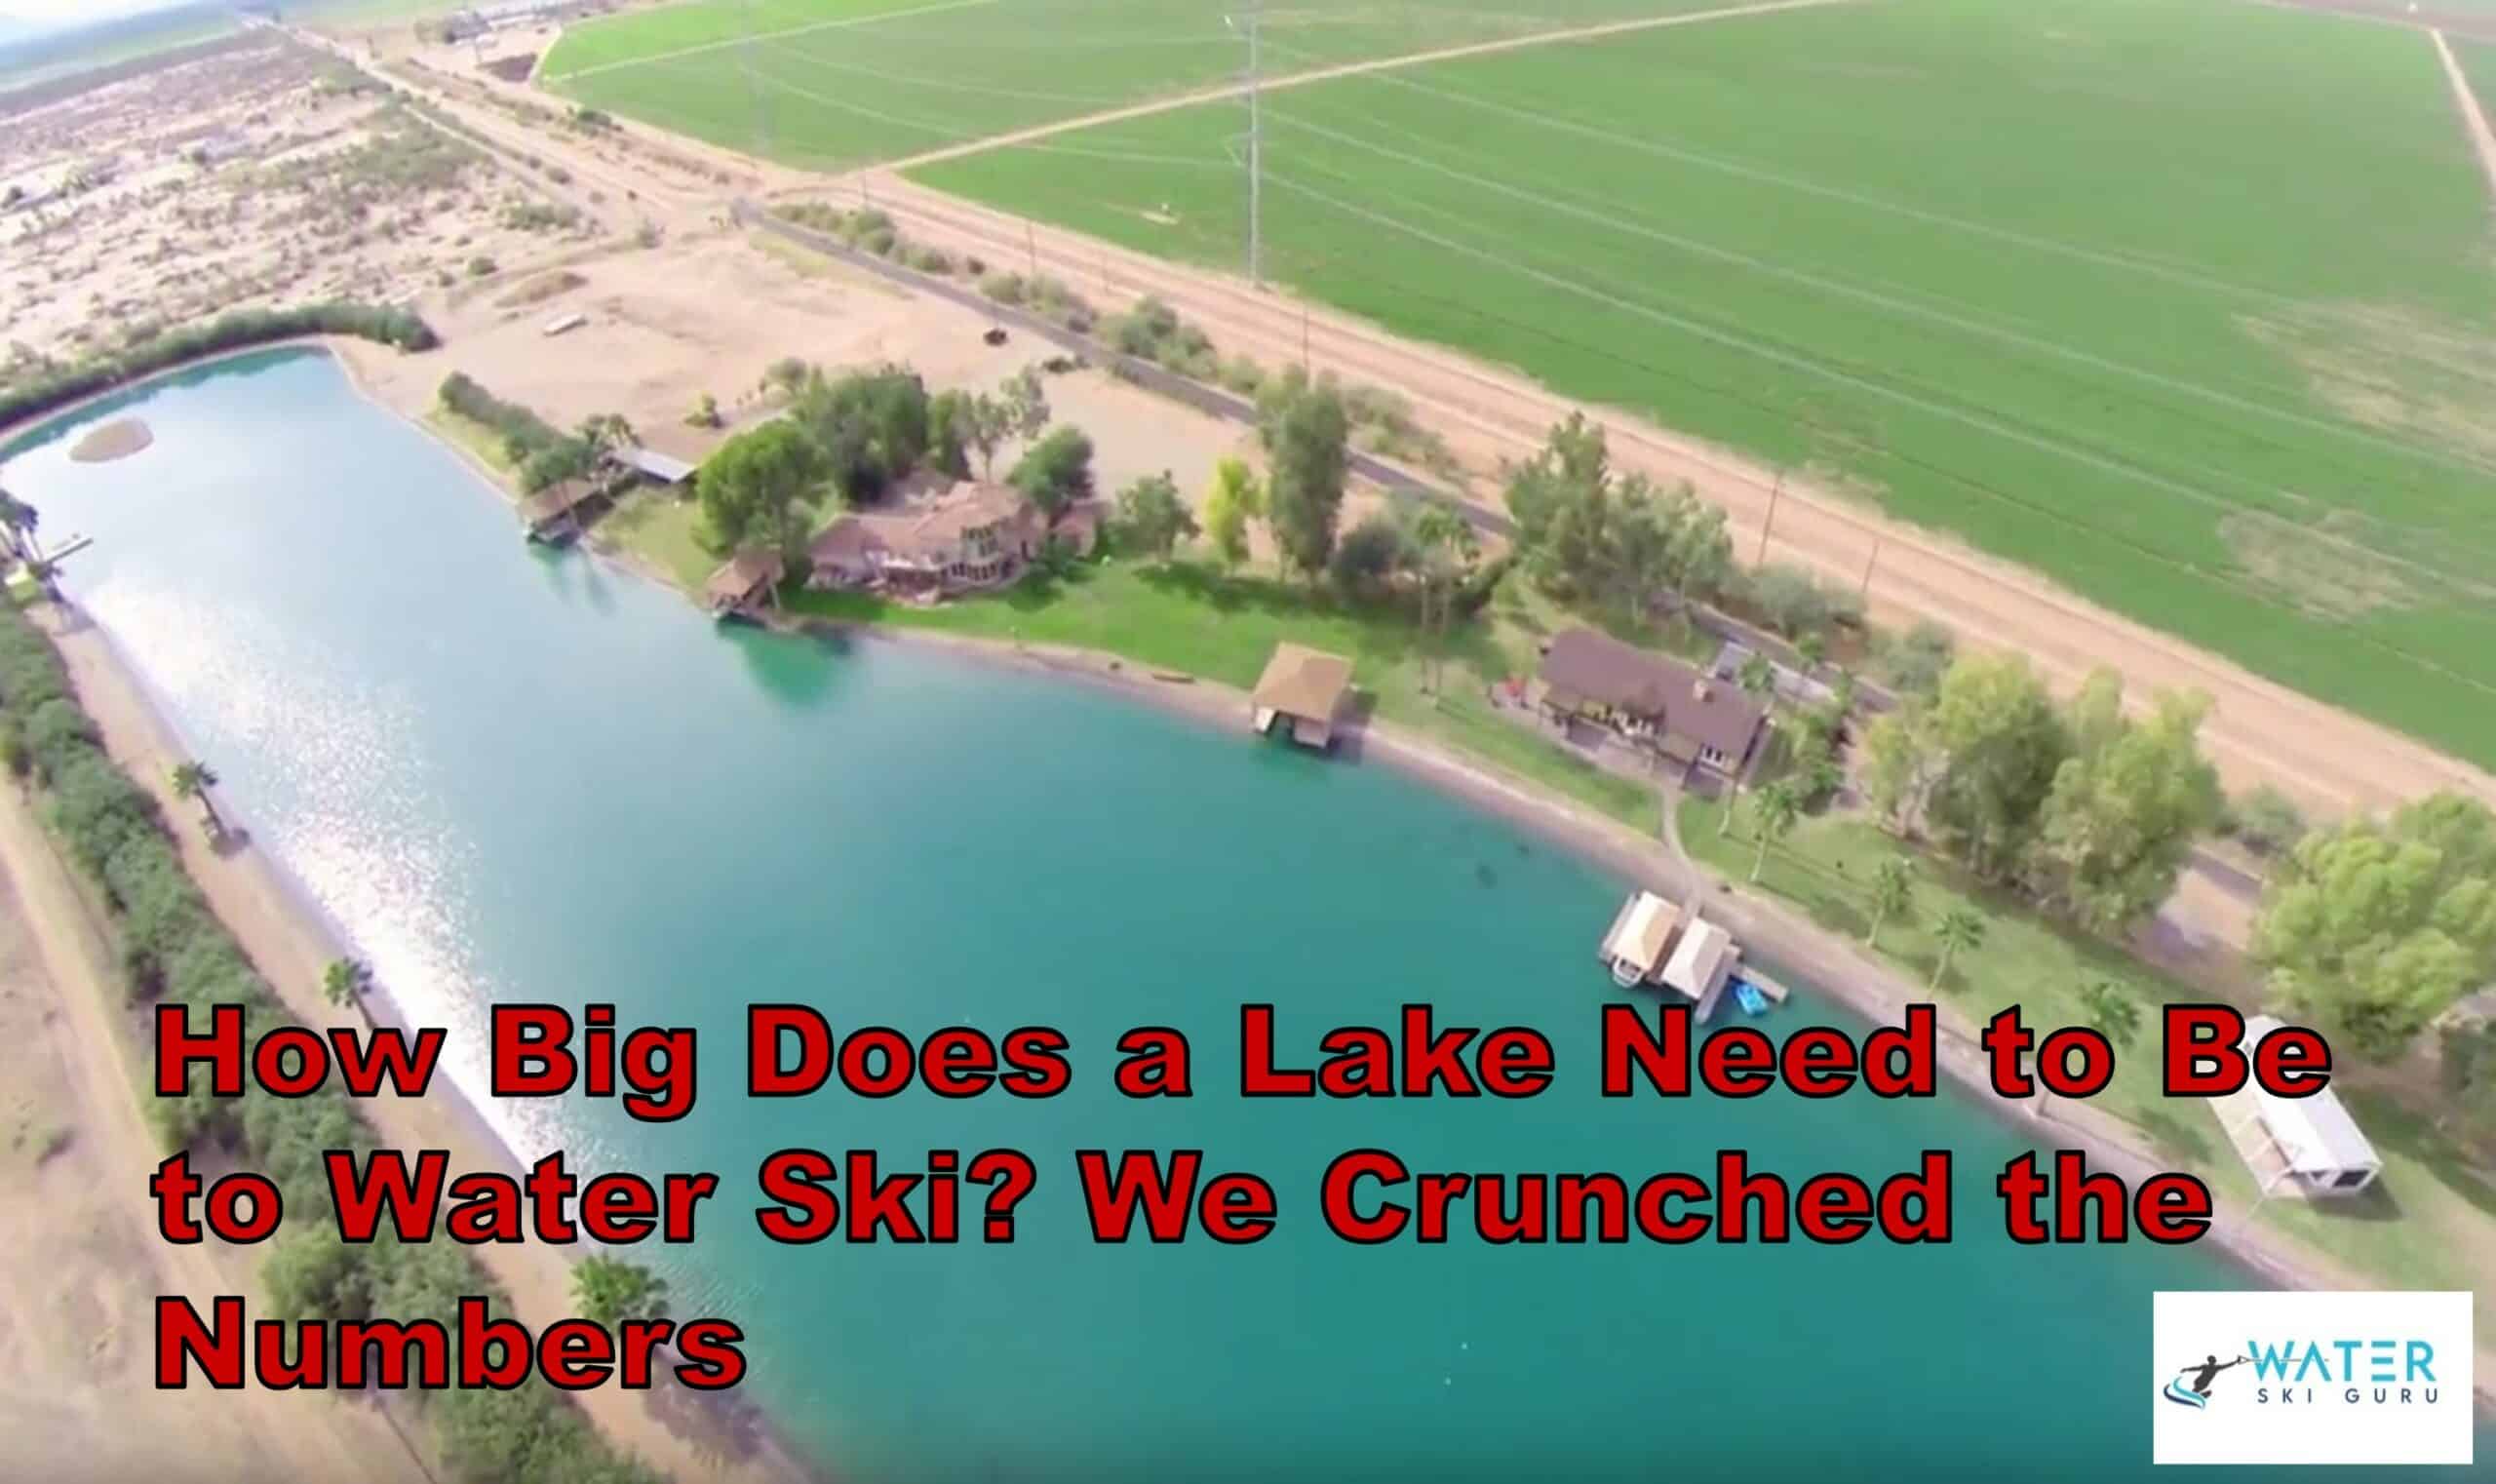 How Big Does a Lake Need to Be to Water Ski We Crunched the Numbers